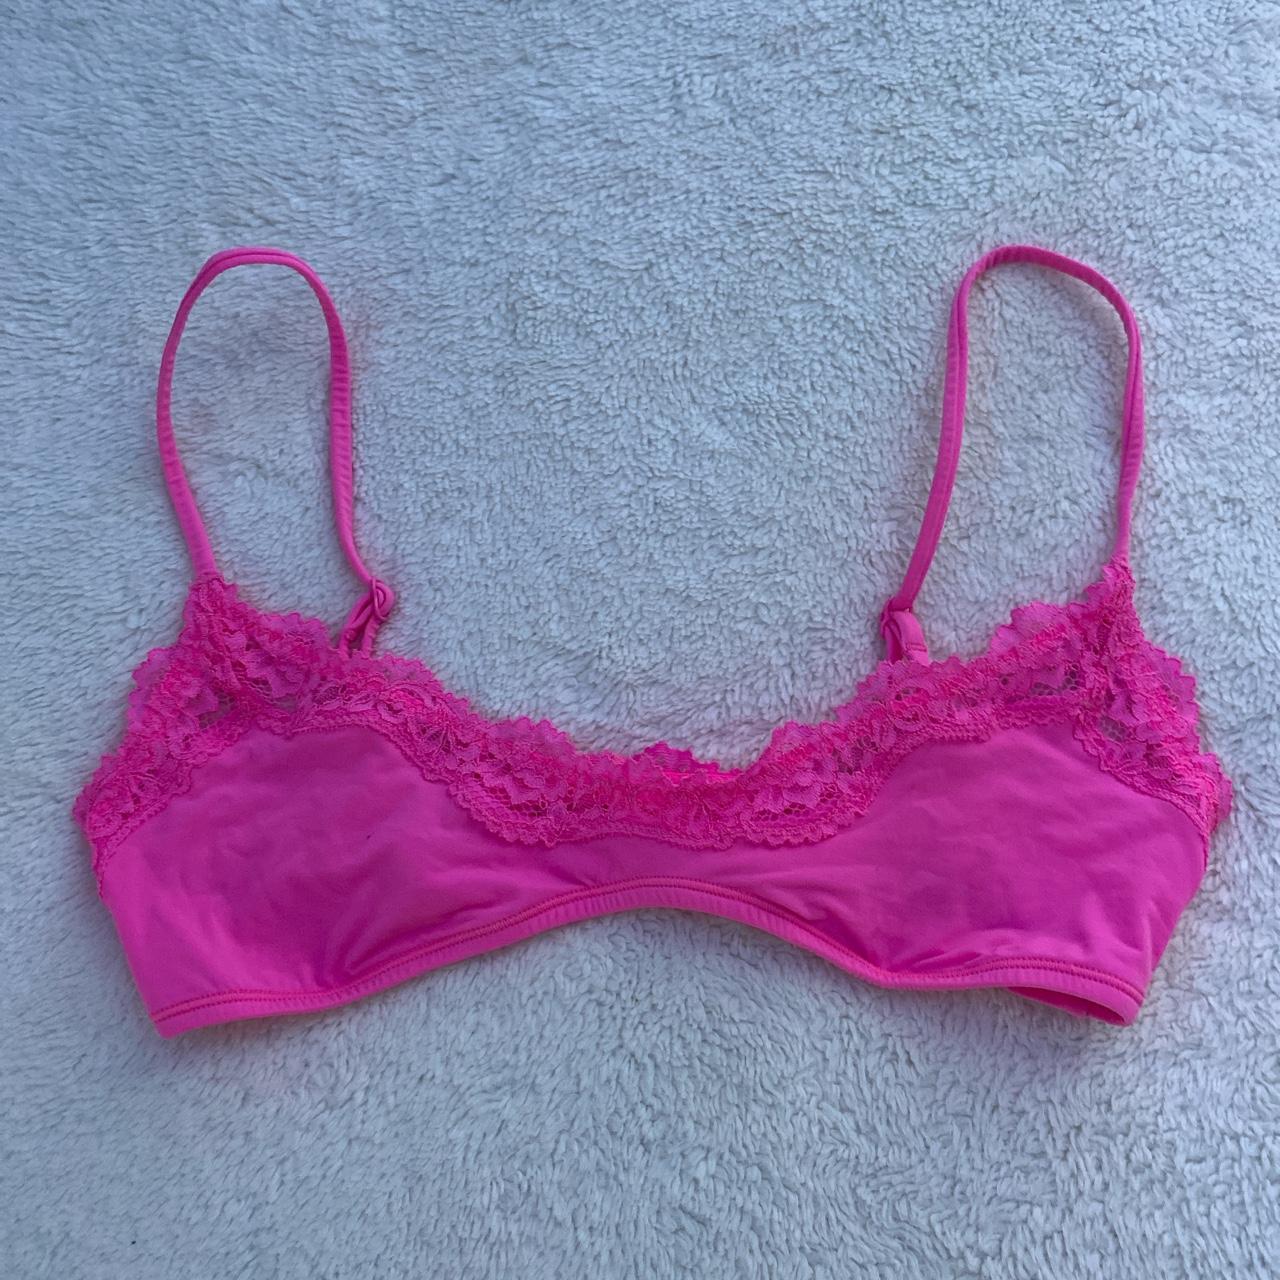 super cute scoop bra- skims dupe two pack from old - Depop